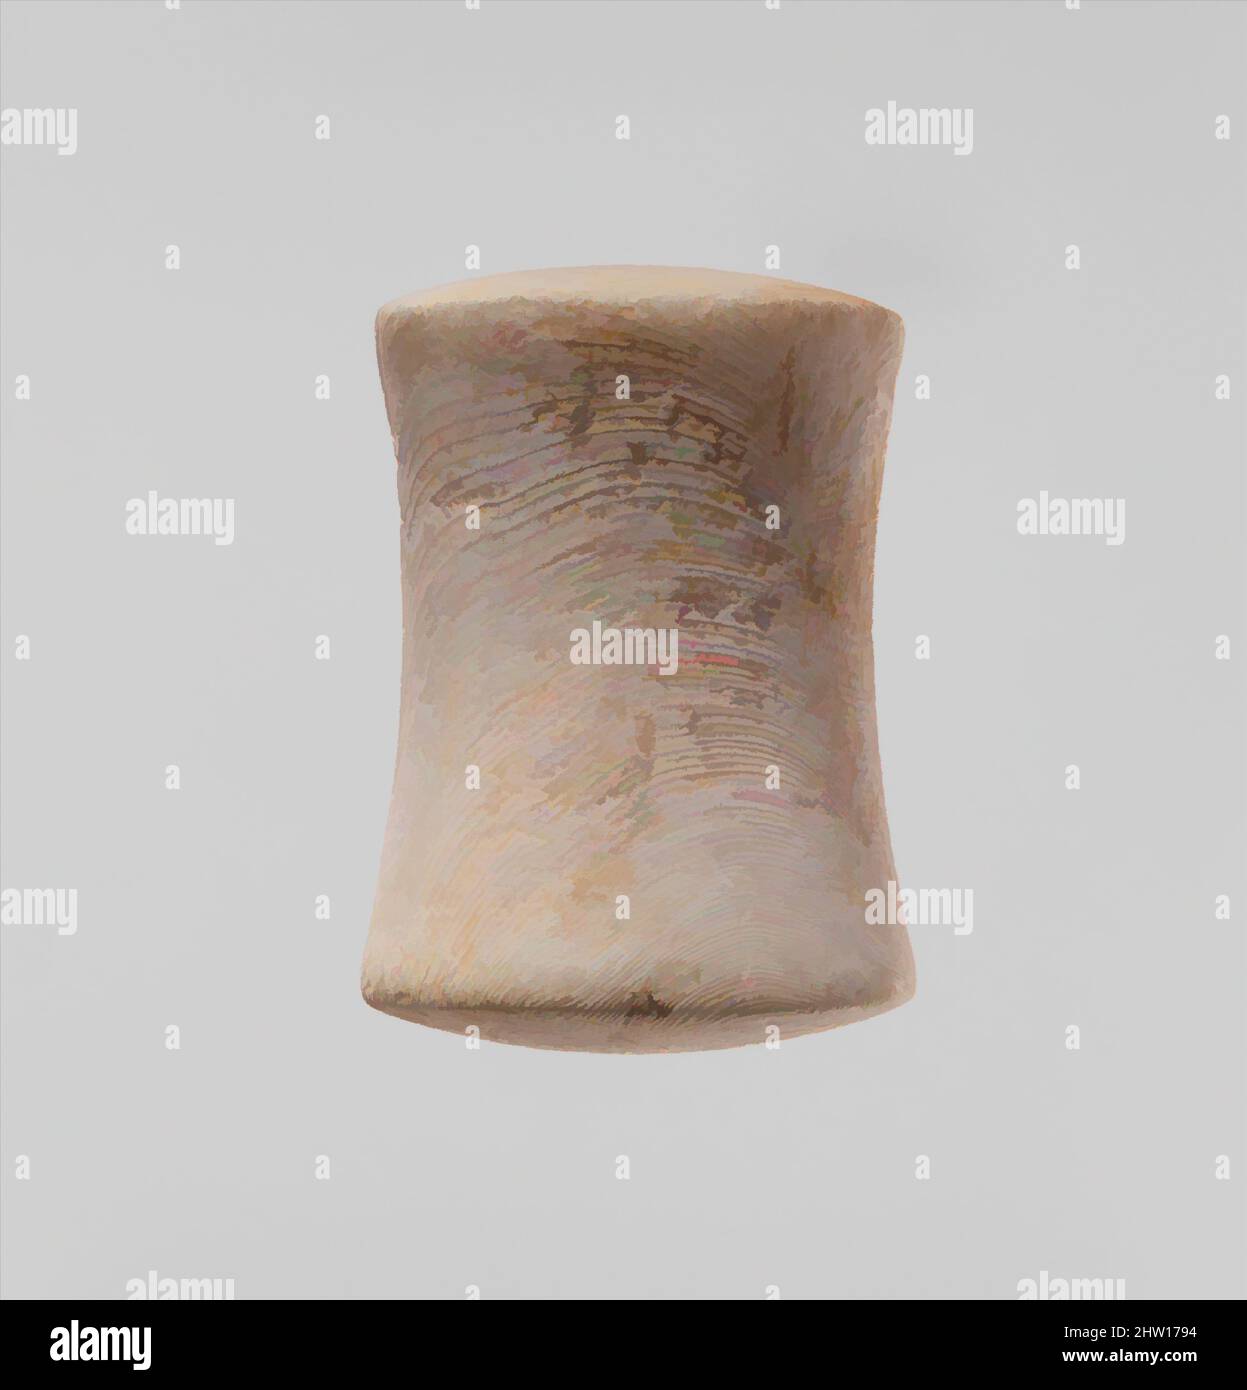 Art inspired by Shell pestle/polisher, Early Cycladic II, ca. 2700–2400 B.C., Cycladic, Spondylus shell (aragonite), 1 7/16 × 1 in. (3.7 × 2.6 cm), Miscellaneous-Shell, Pestle or polisher carved from a piece of shell, Classic works modernized by Artotop with a splash of modernity. Shapes, color and value, eye-catching visual impact on art. Emotions through freedom of artworks in a contemporary way. A timeless message pursuing a wildly creative new direction. Artists turning to the digital medium and creating the Artotop NFT Stock Photo